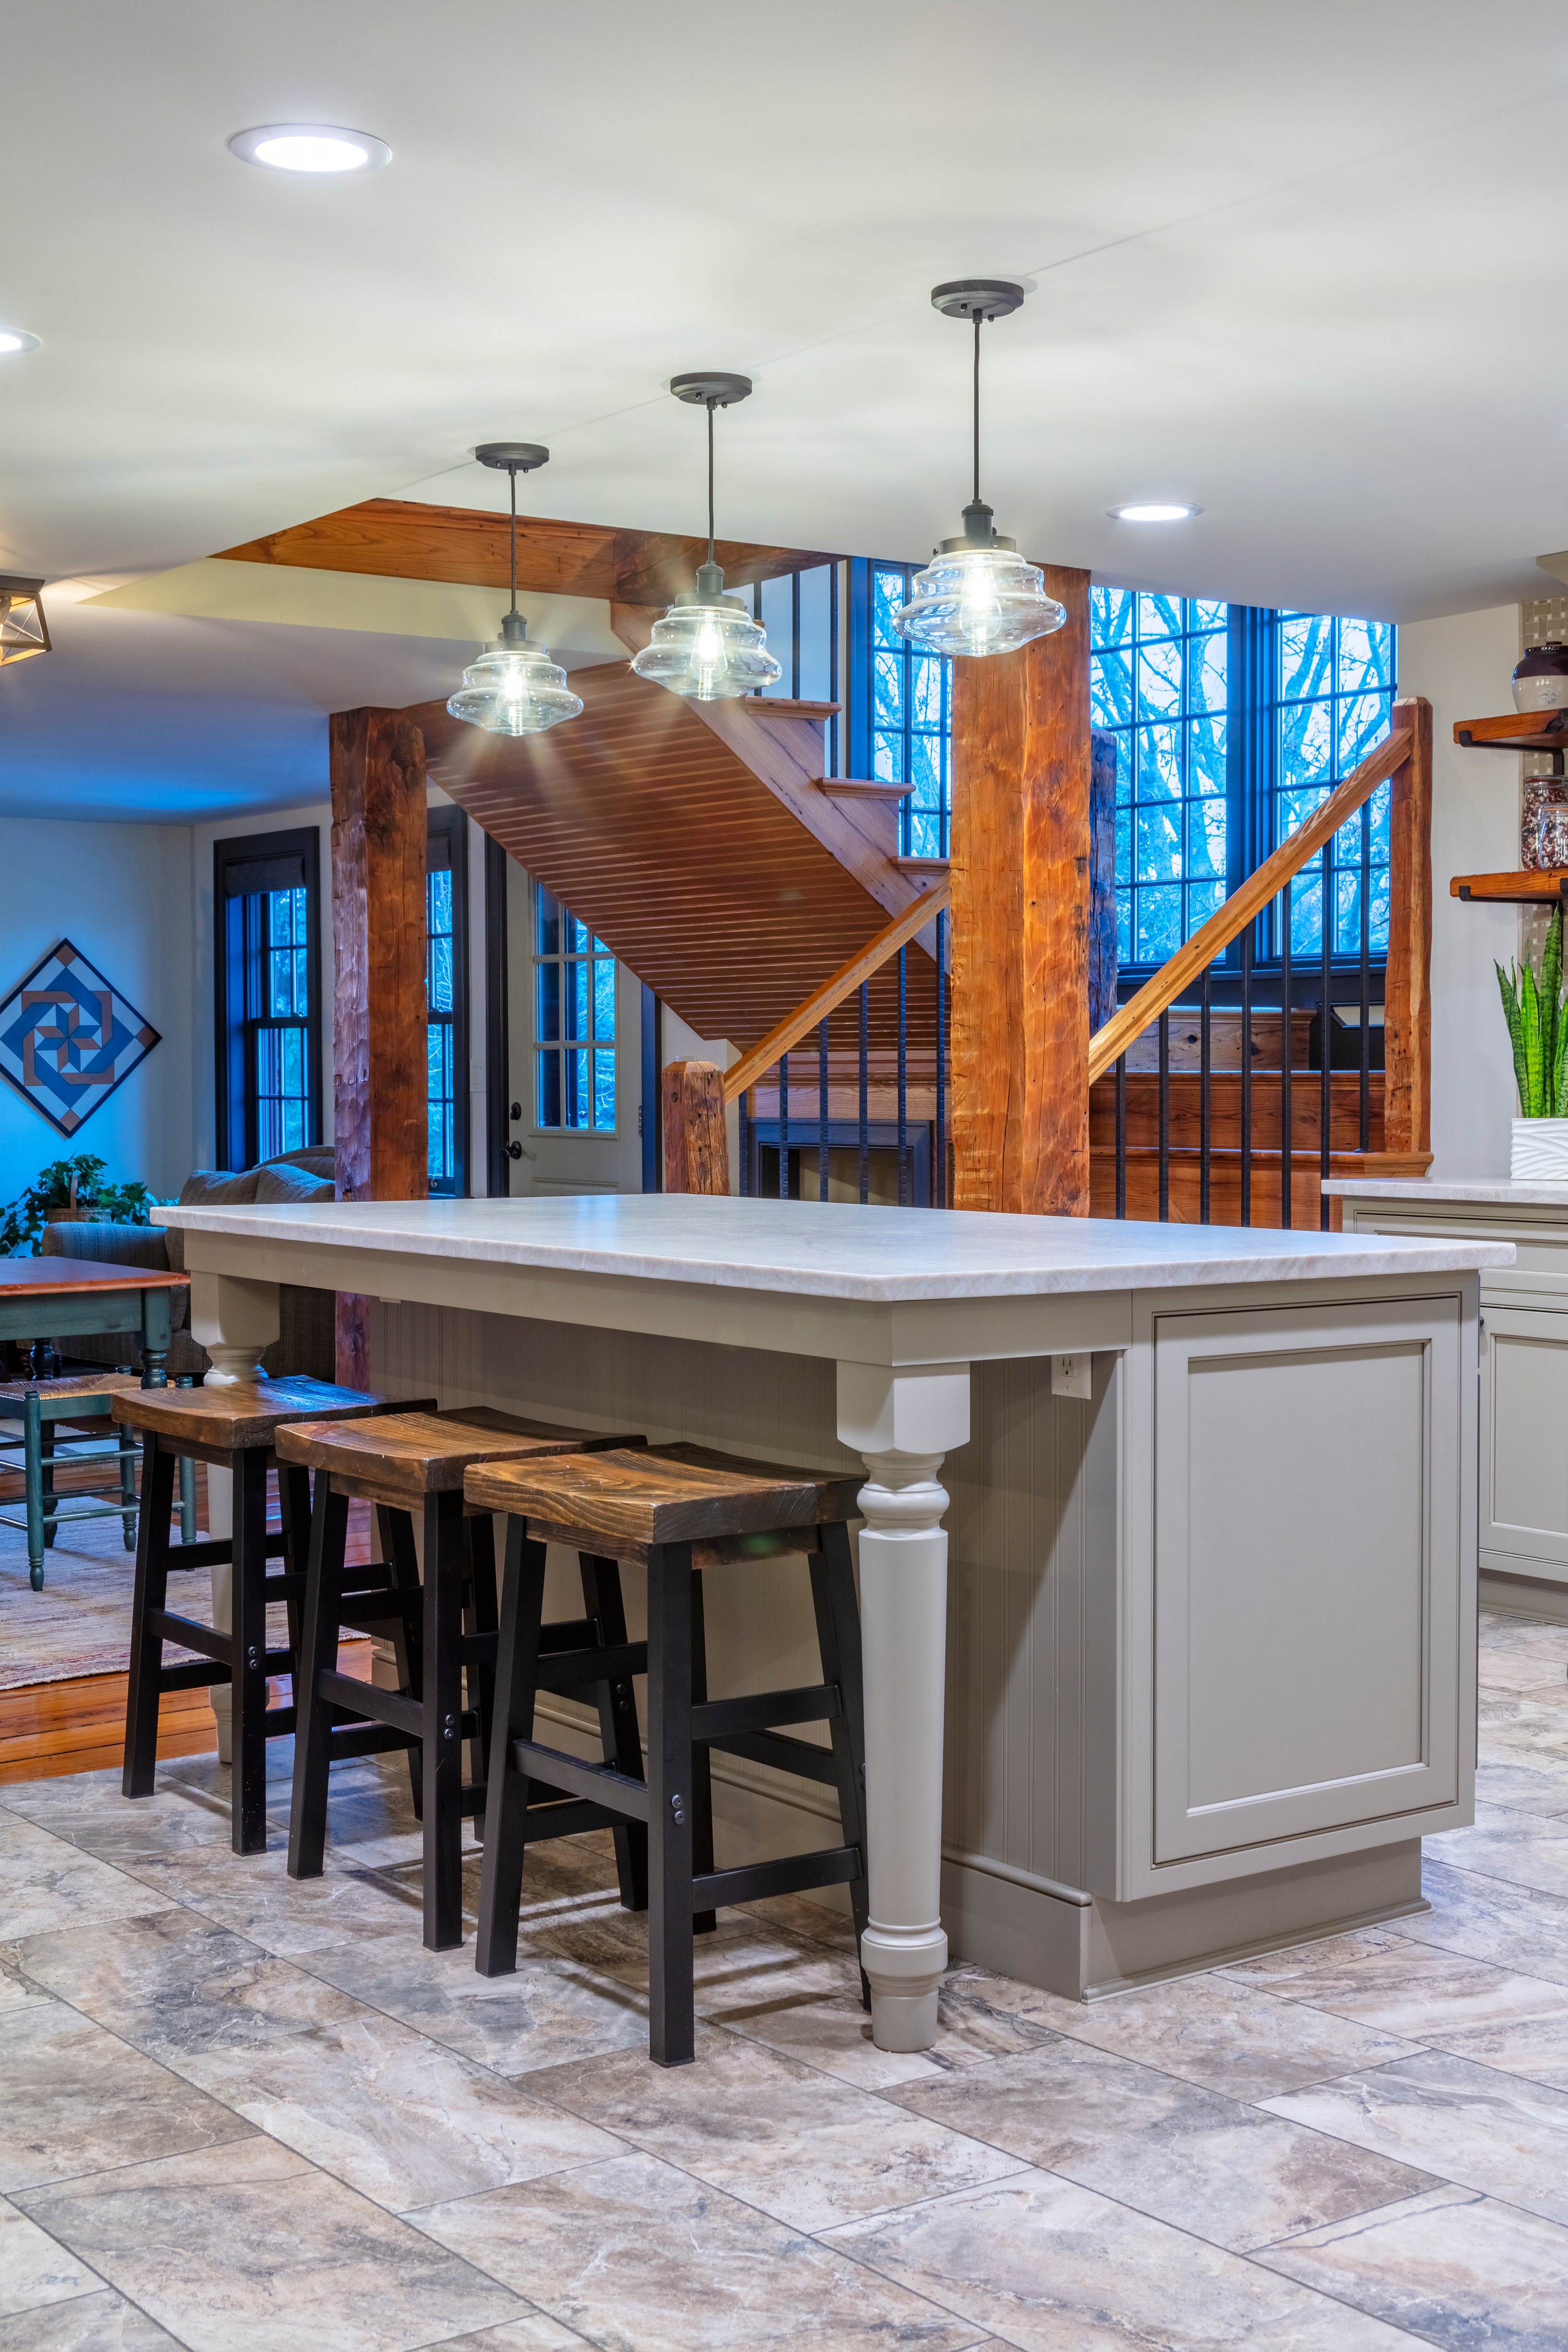 A large kitchen island with seating and pendant lighting above.